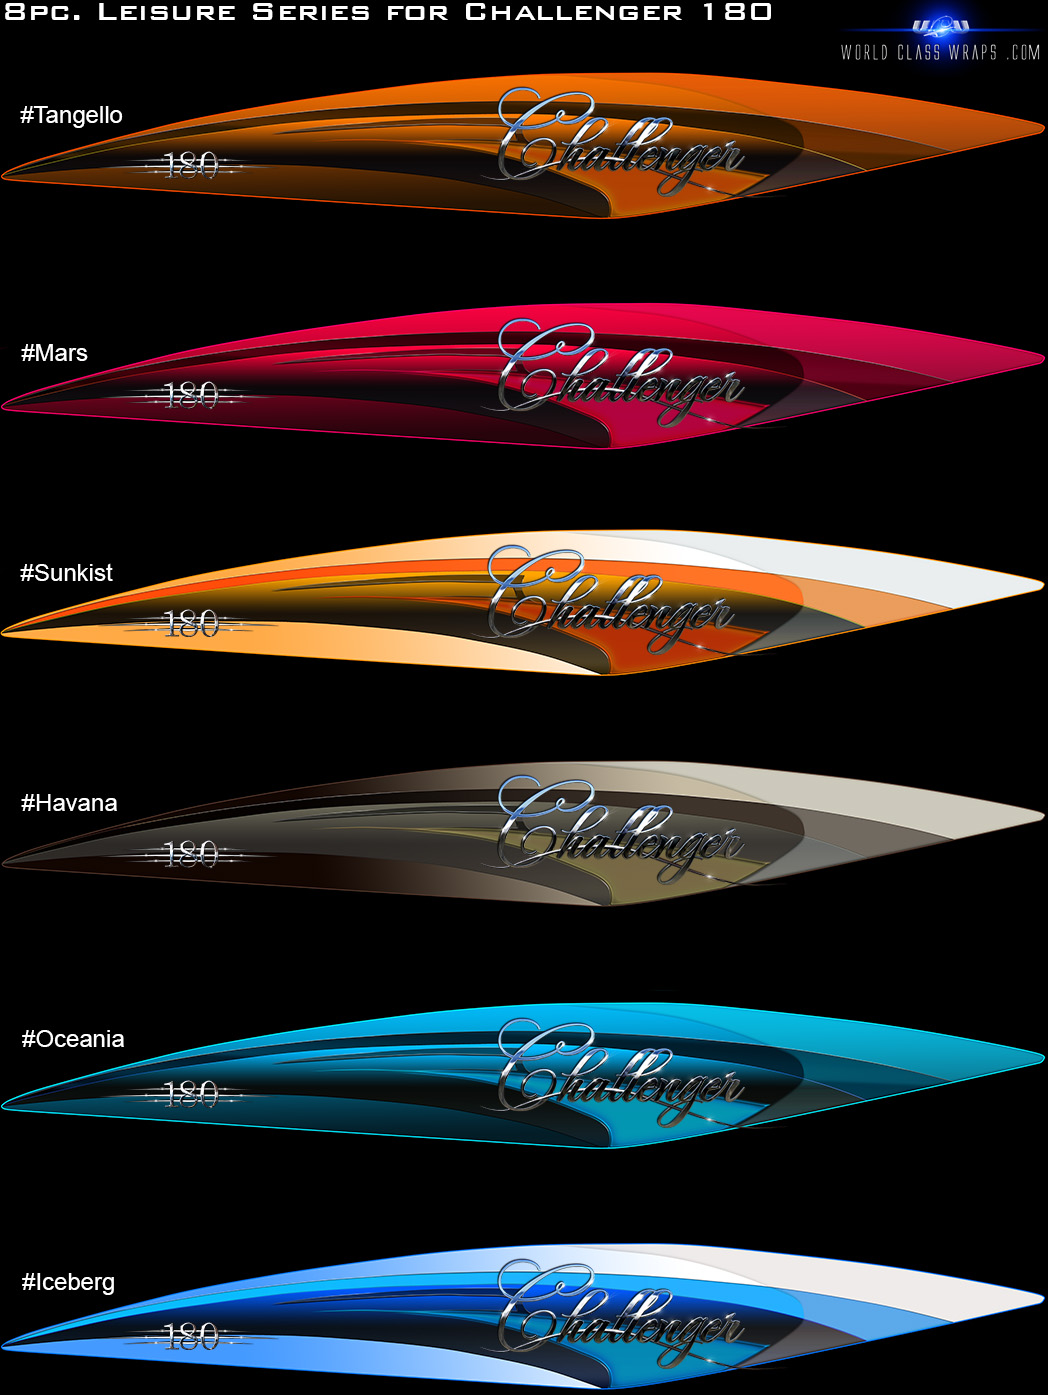 Stardust series challenger boat graphics image